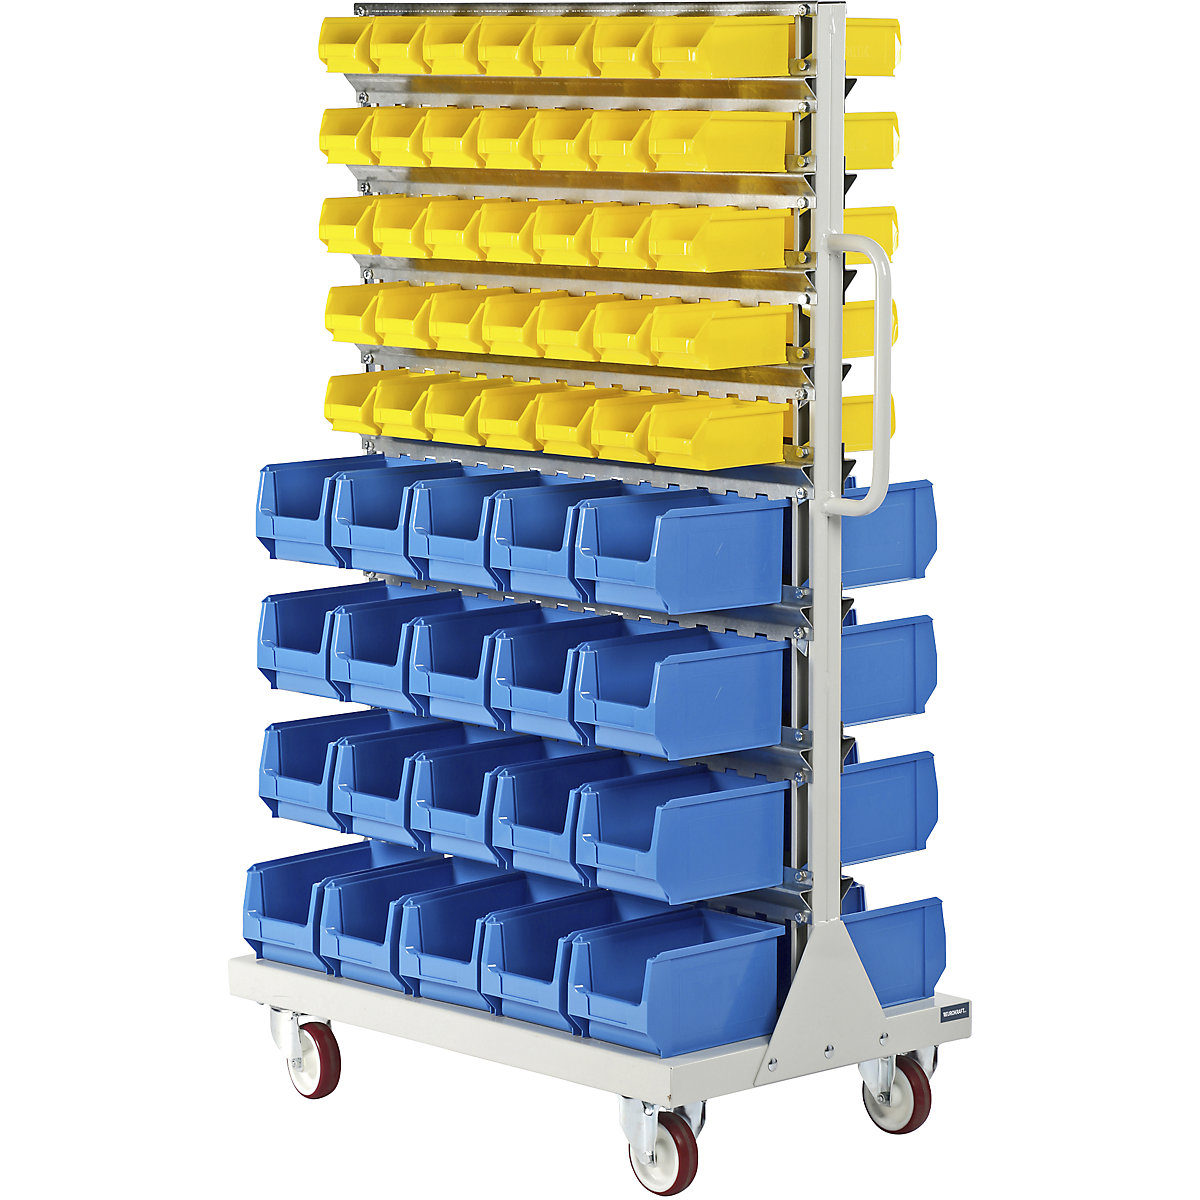 Mobile rack with open fronted storage bins – eurokraft pro, double sided, HxWxD 1450 x 855 x 540 mm, with 140 bins-4